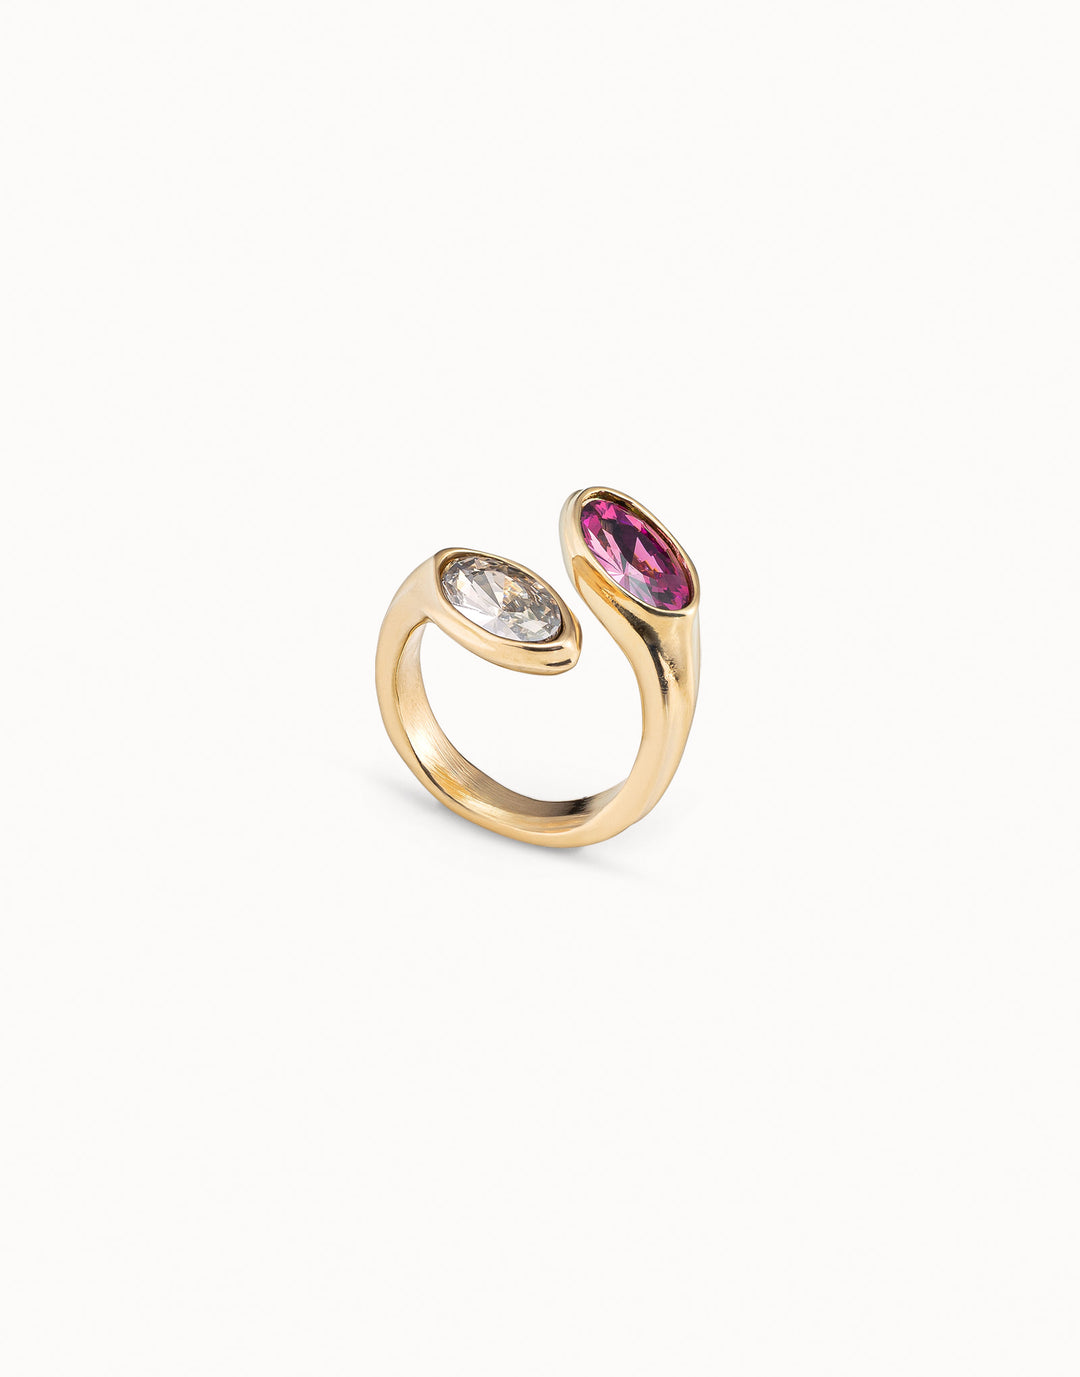 SPRING RING - GOLD - Kingfisher Road - Online Boutique